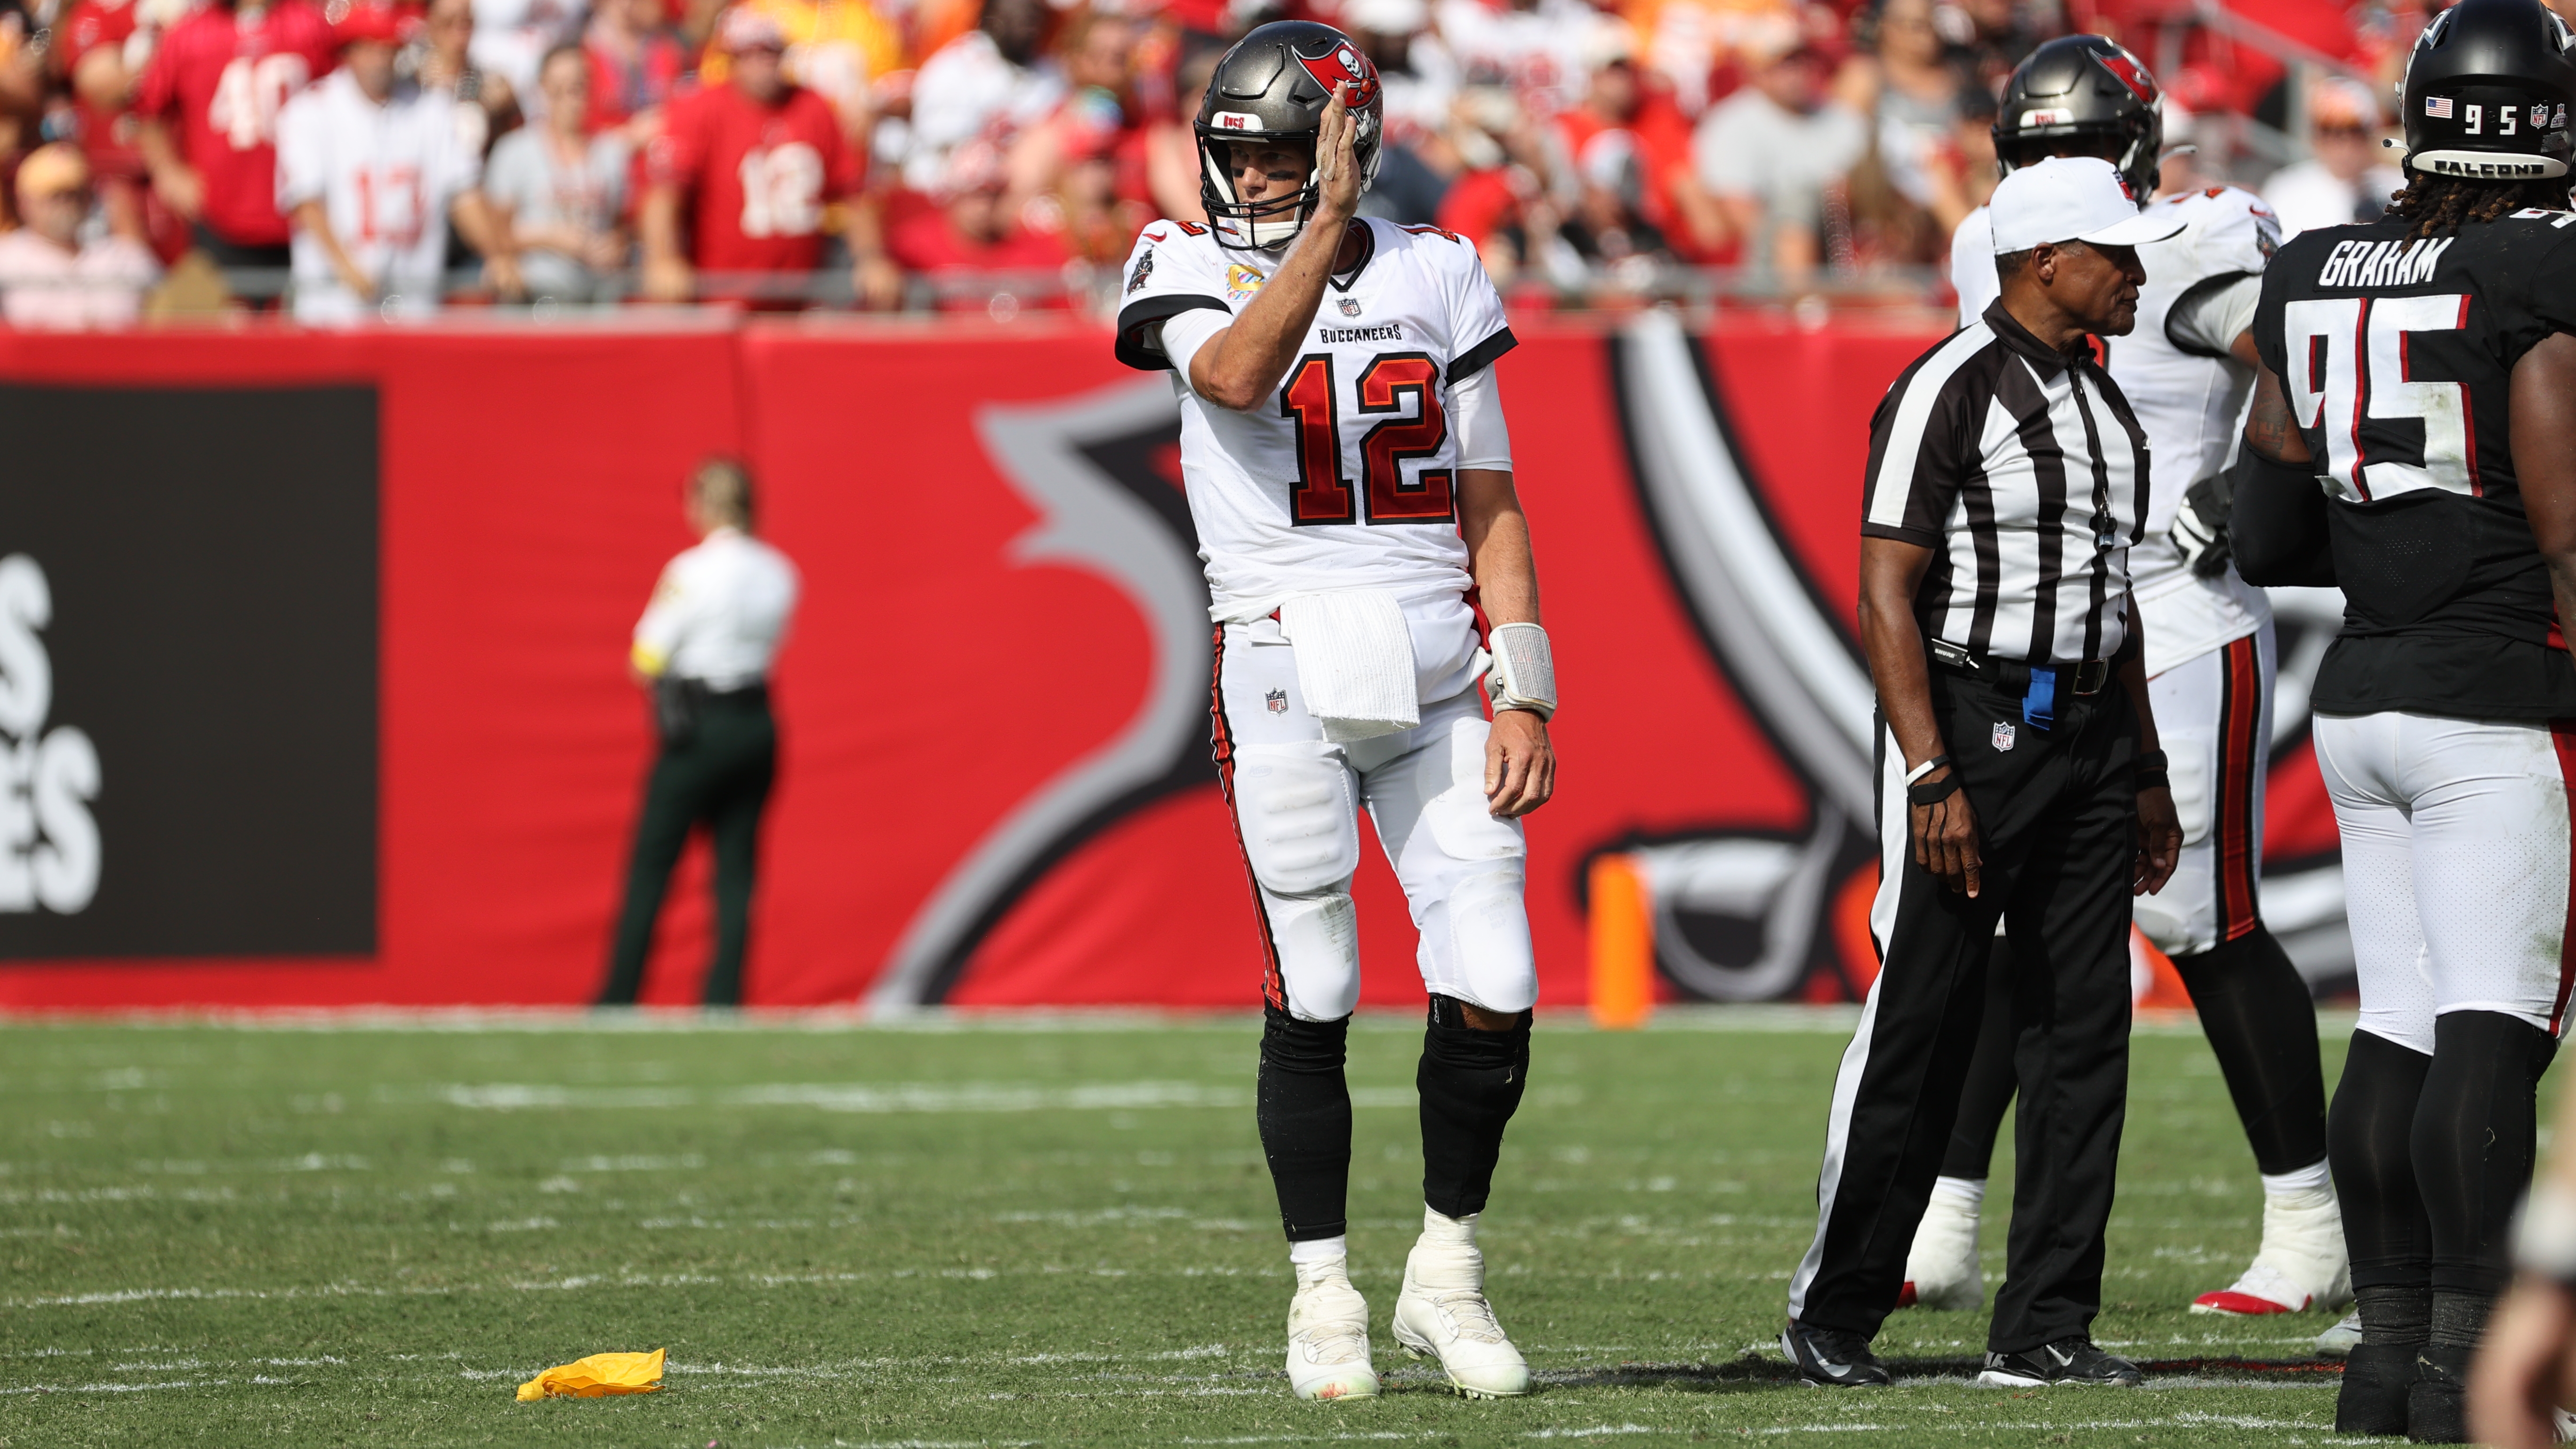 Talking heads, Twitter concur that Falcons were robbed by roughing penalty